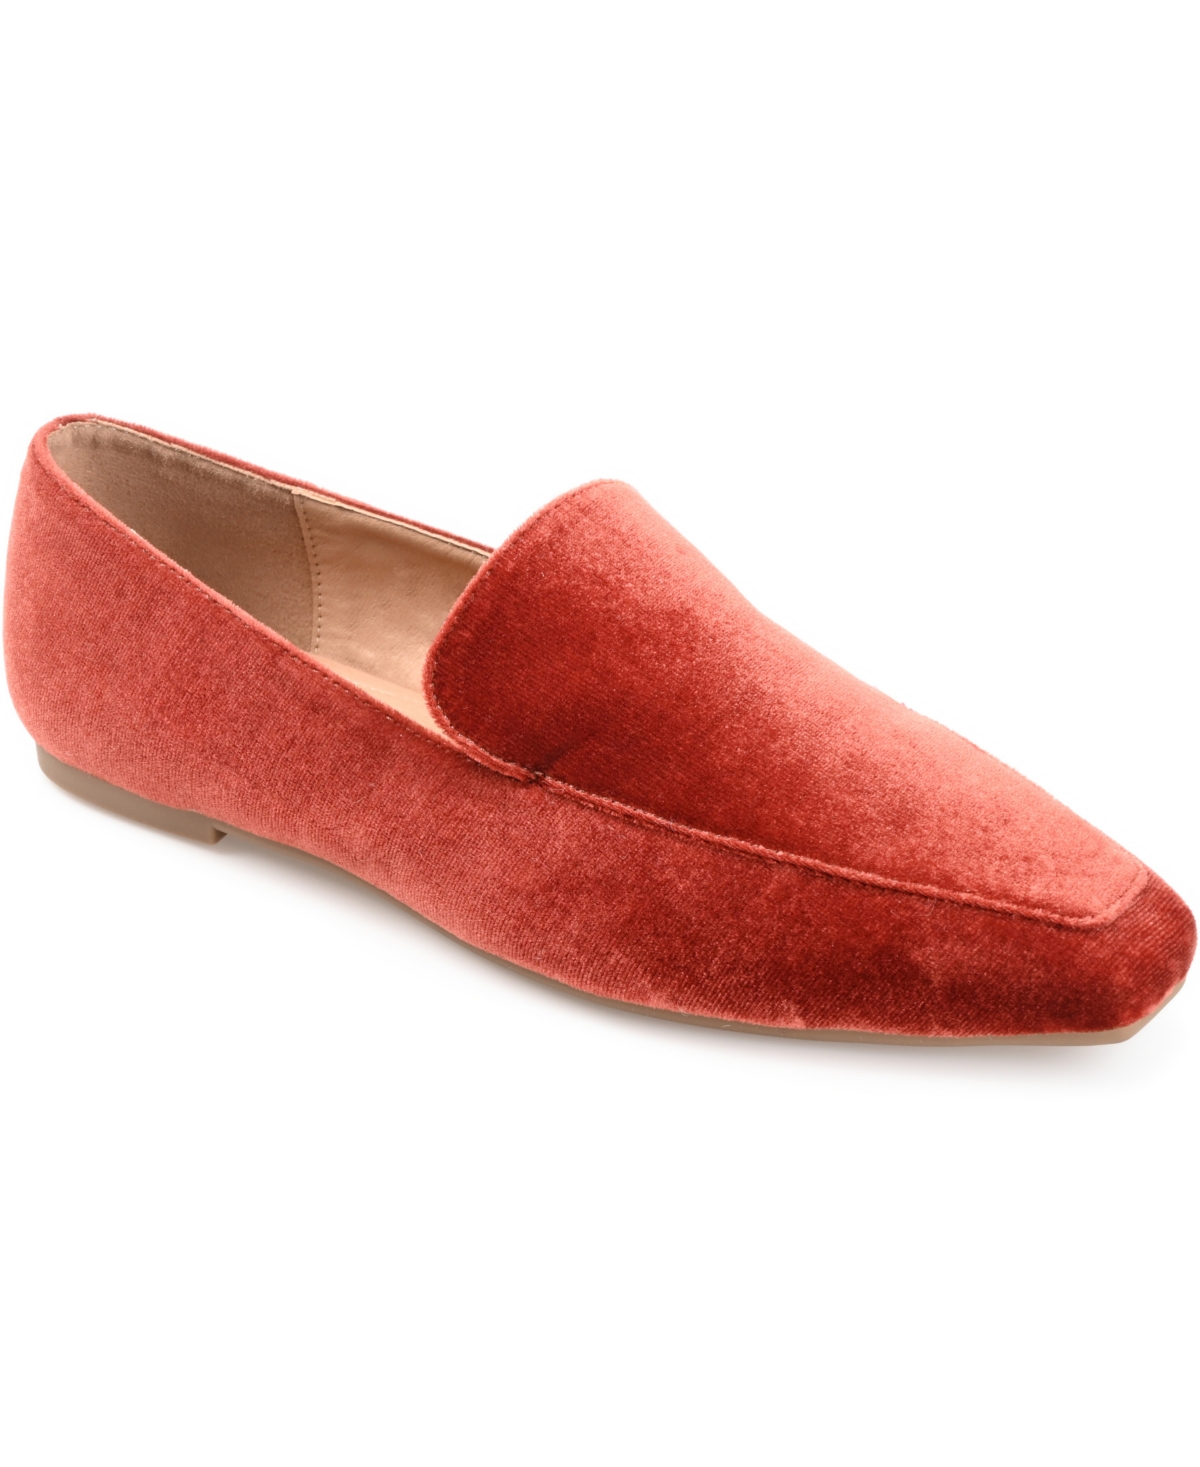 Journee Collection Women's Silas Velvet Loafer Women's Shoes